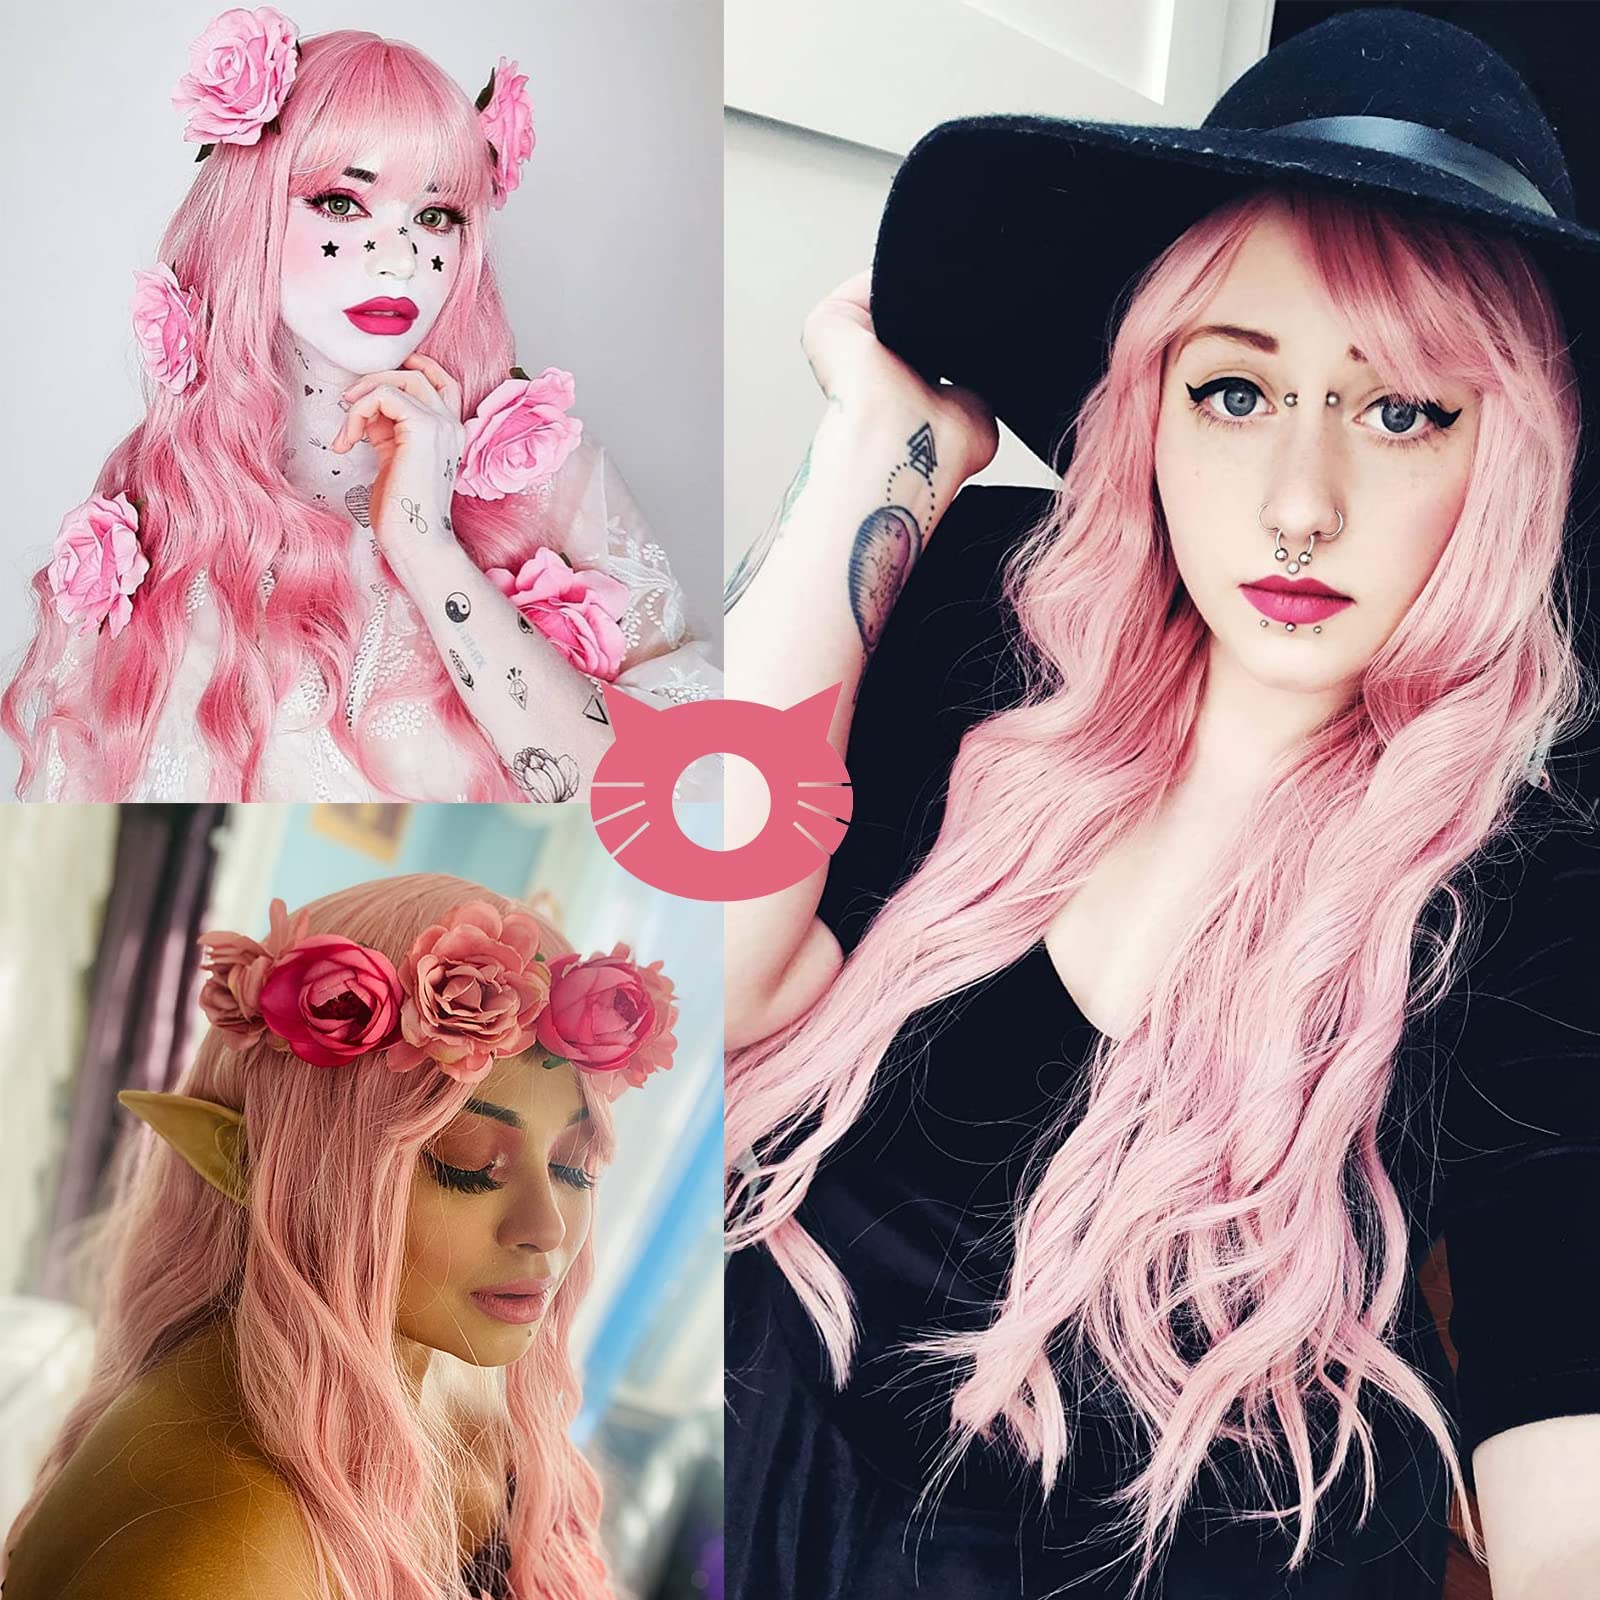 Netgo Women's Pink Wig Long Fluffy Curly Wavy Hair Wigs for Girl Heat Friendly Synthetic Cosplay Party Wigs